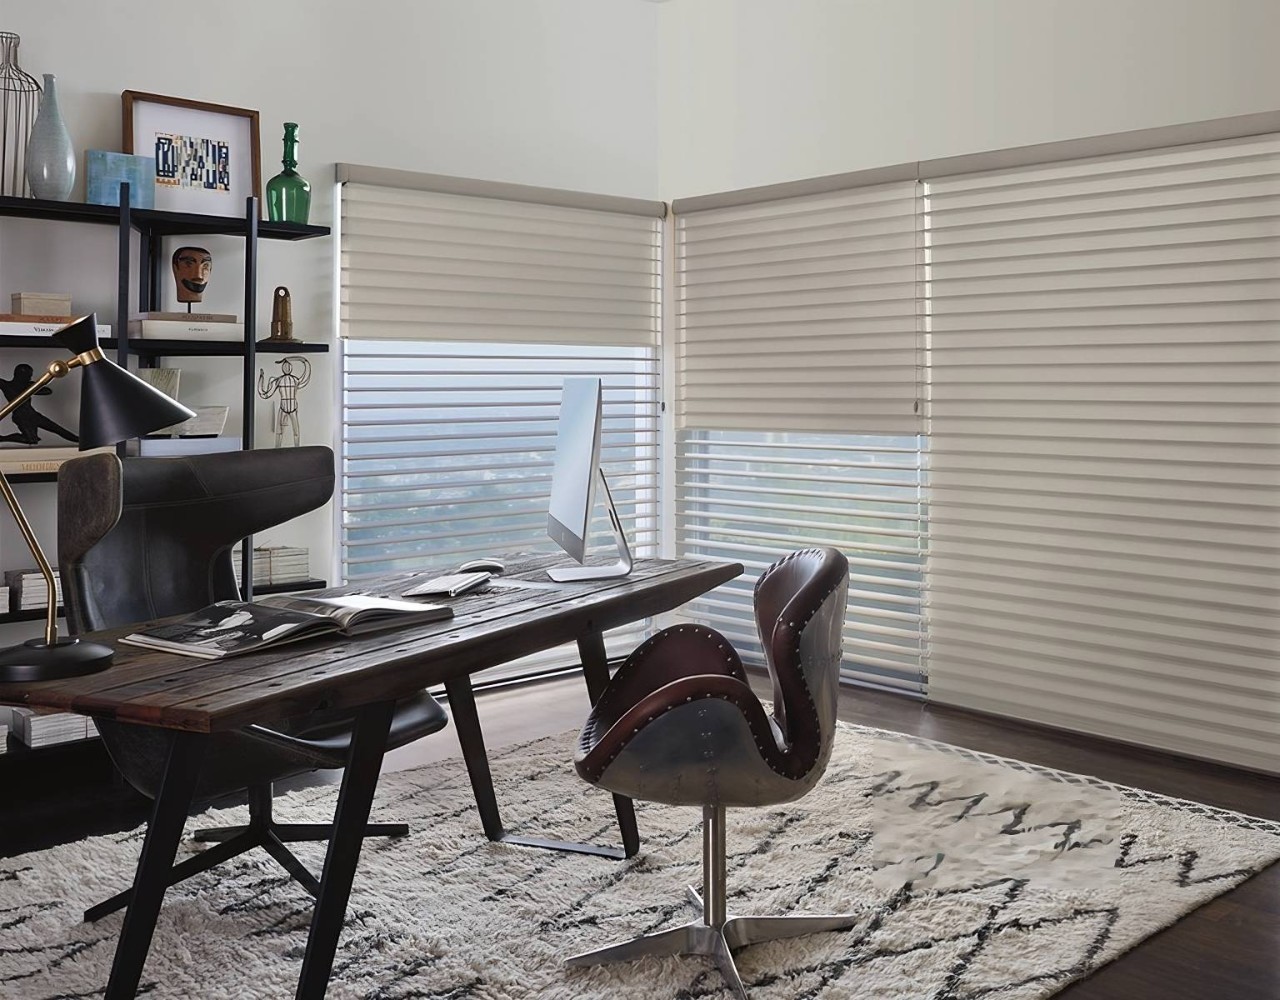 Hunter Douglas Silhouette® Sheer Shades installed in an upscale home office near Staten Island, NY